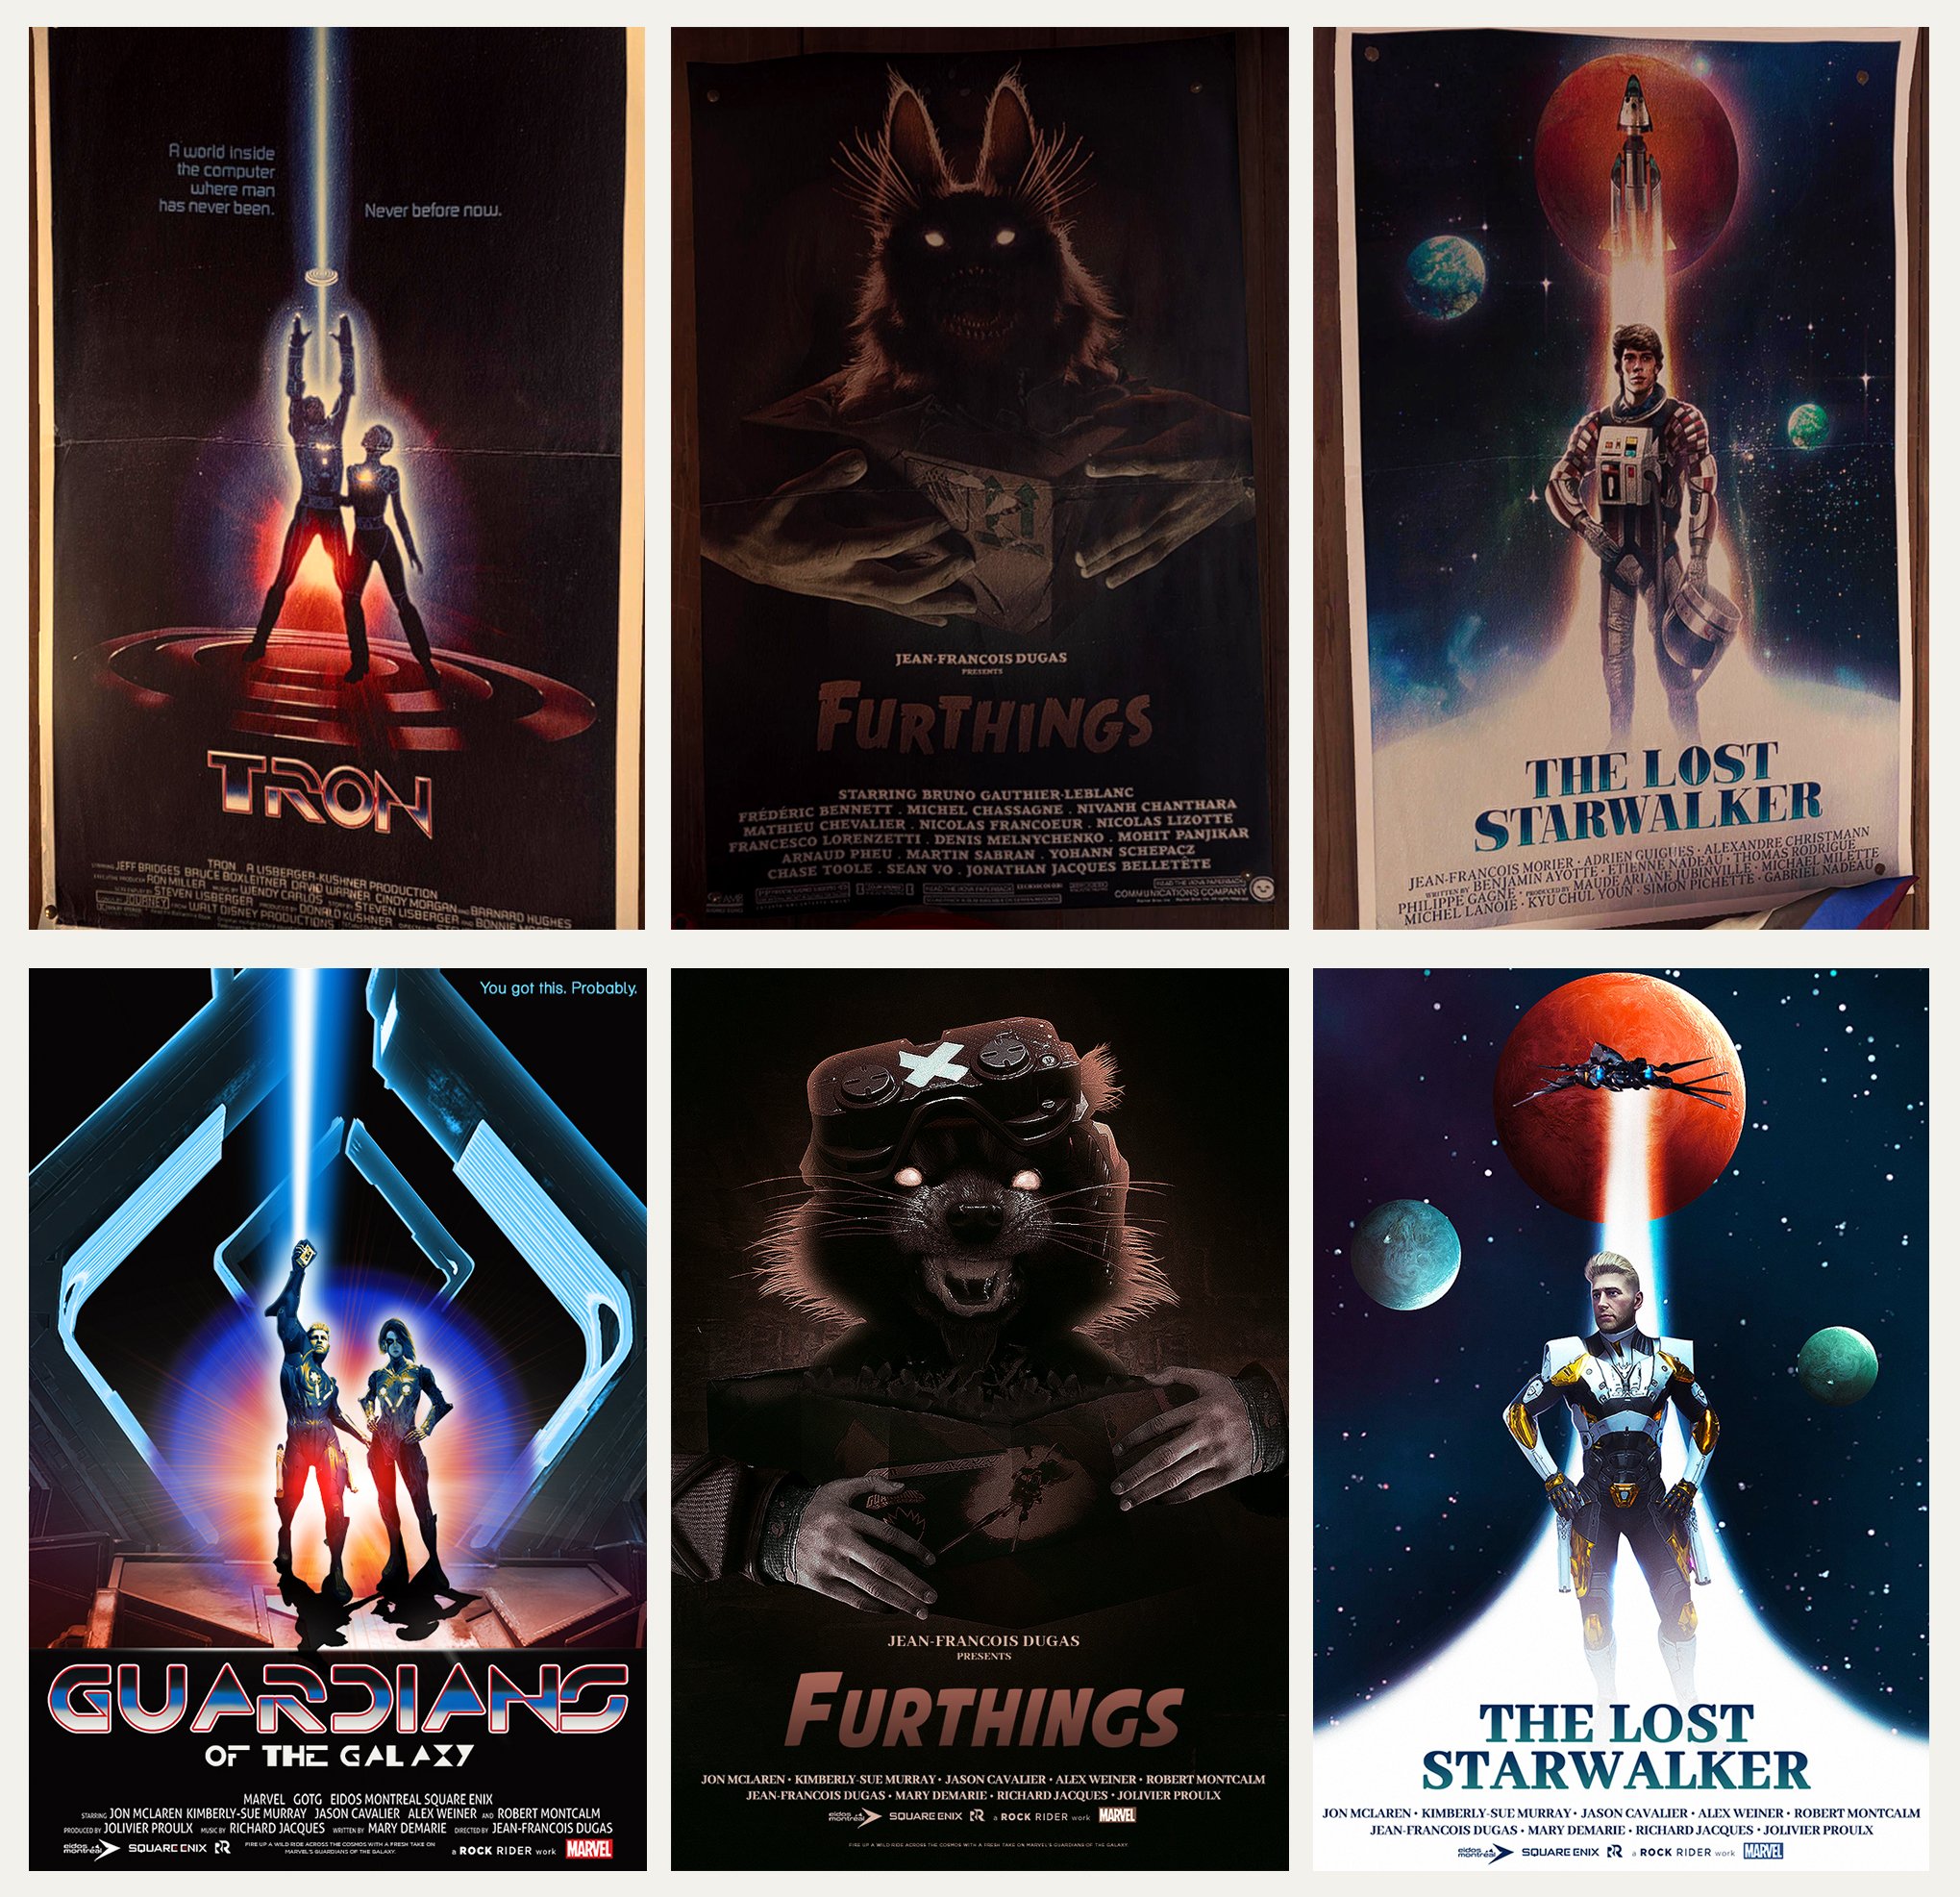 lettergreep deken rand Rock Rìder on Twitter: "My GOTG recreation trilogy posters! 🤘 #GOTG  #GOTGgame #GOTGthegame #Fanart #Posters #StarLord #RRconceptual  https://t.co/G3oGygup3s" / Twitter